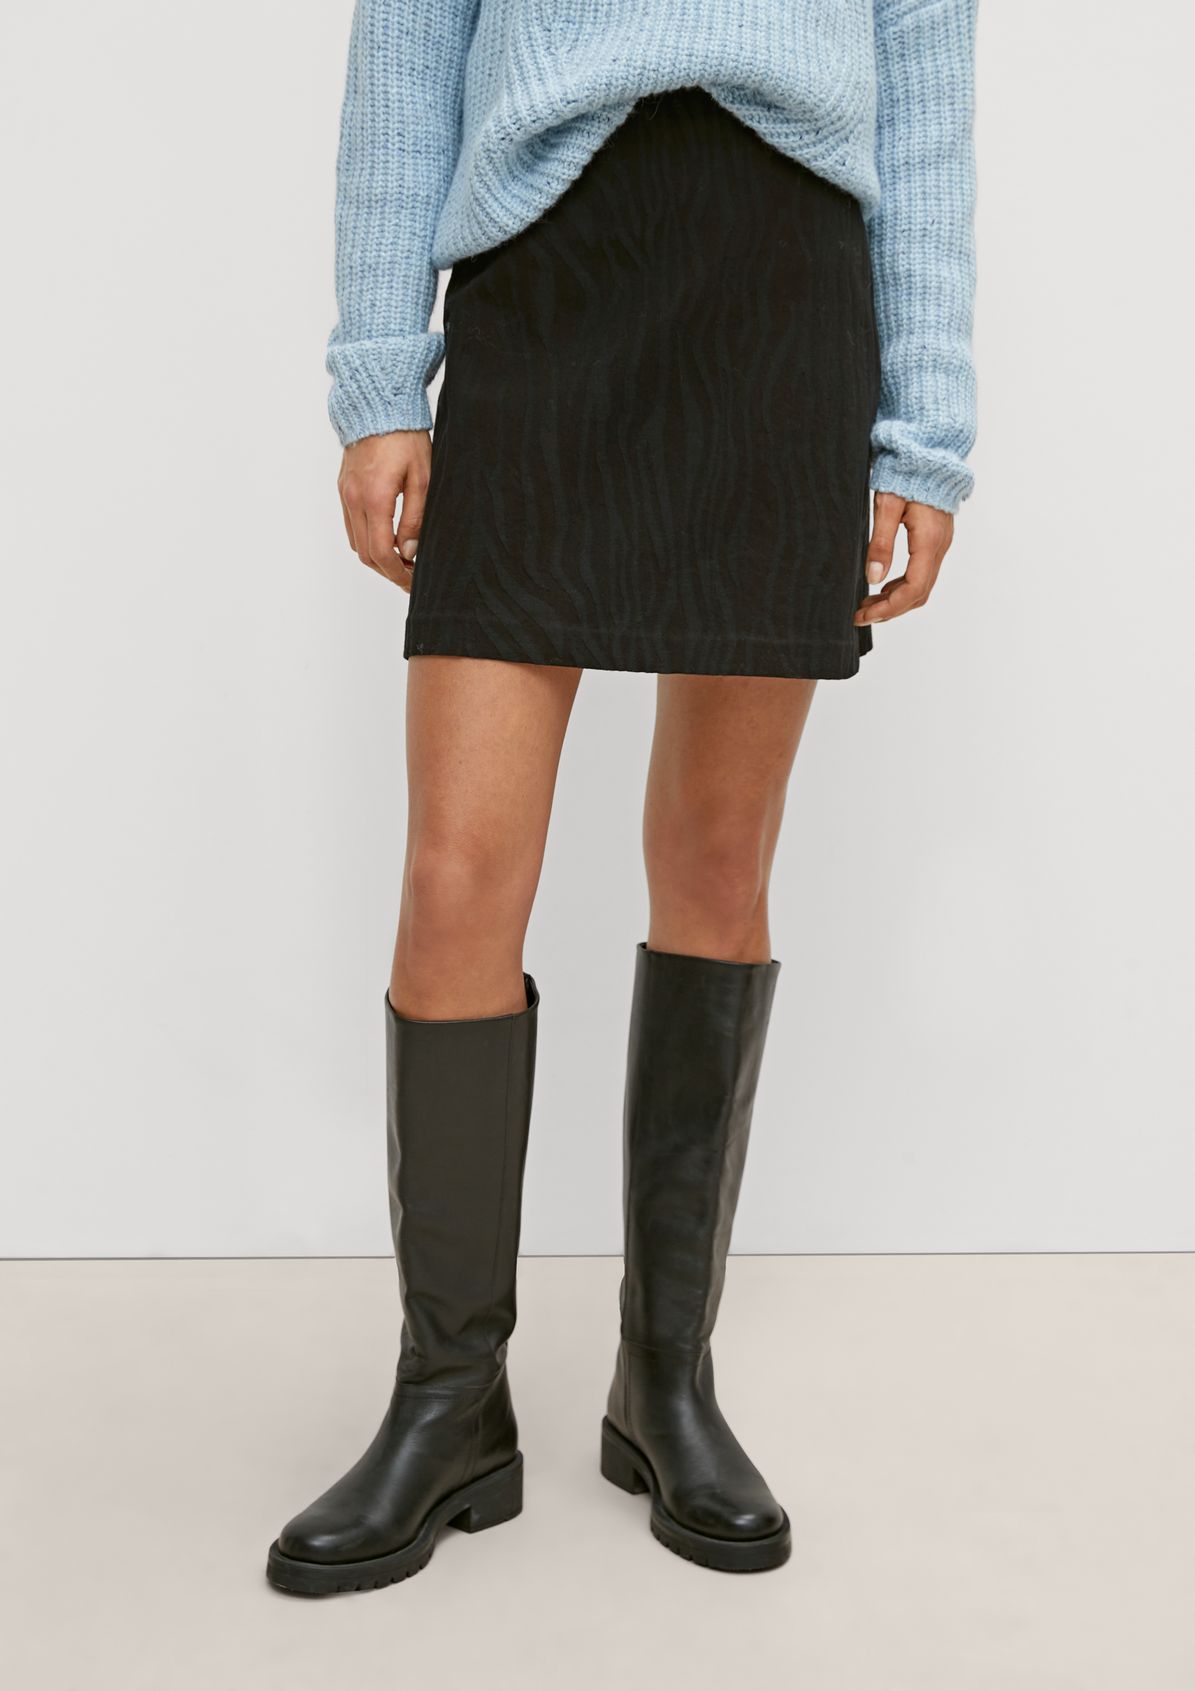 Denim skirt with an animal pattern from comma